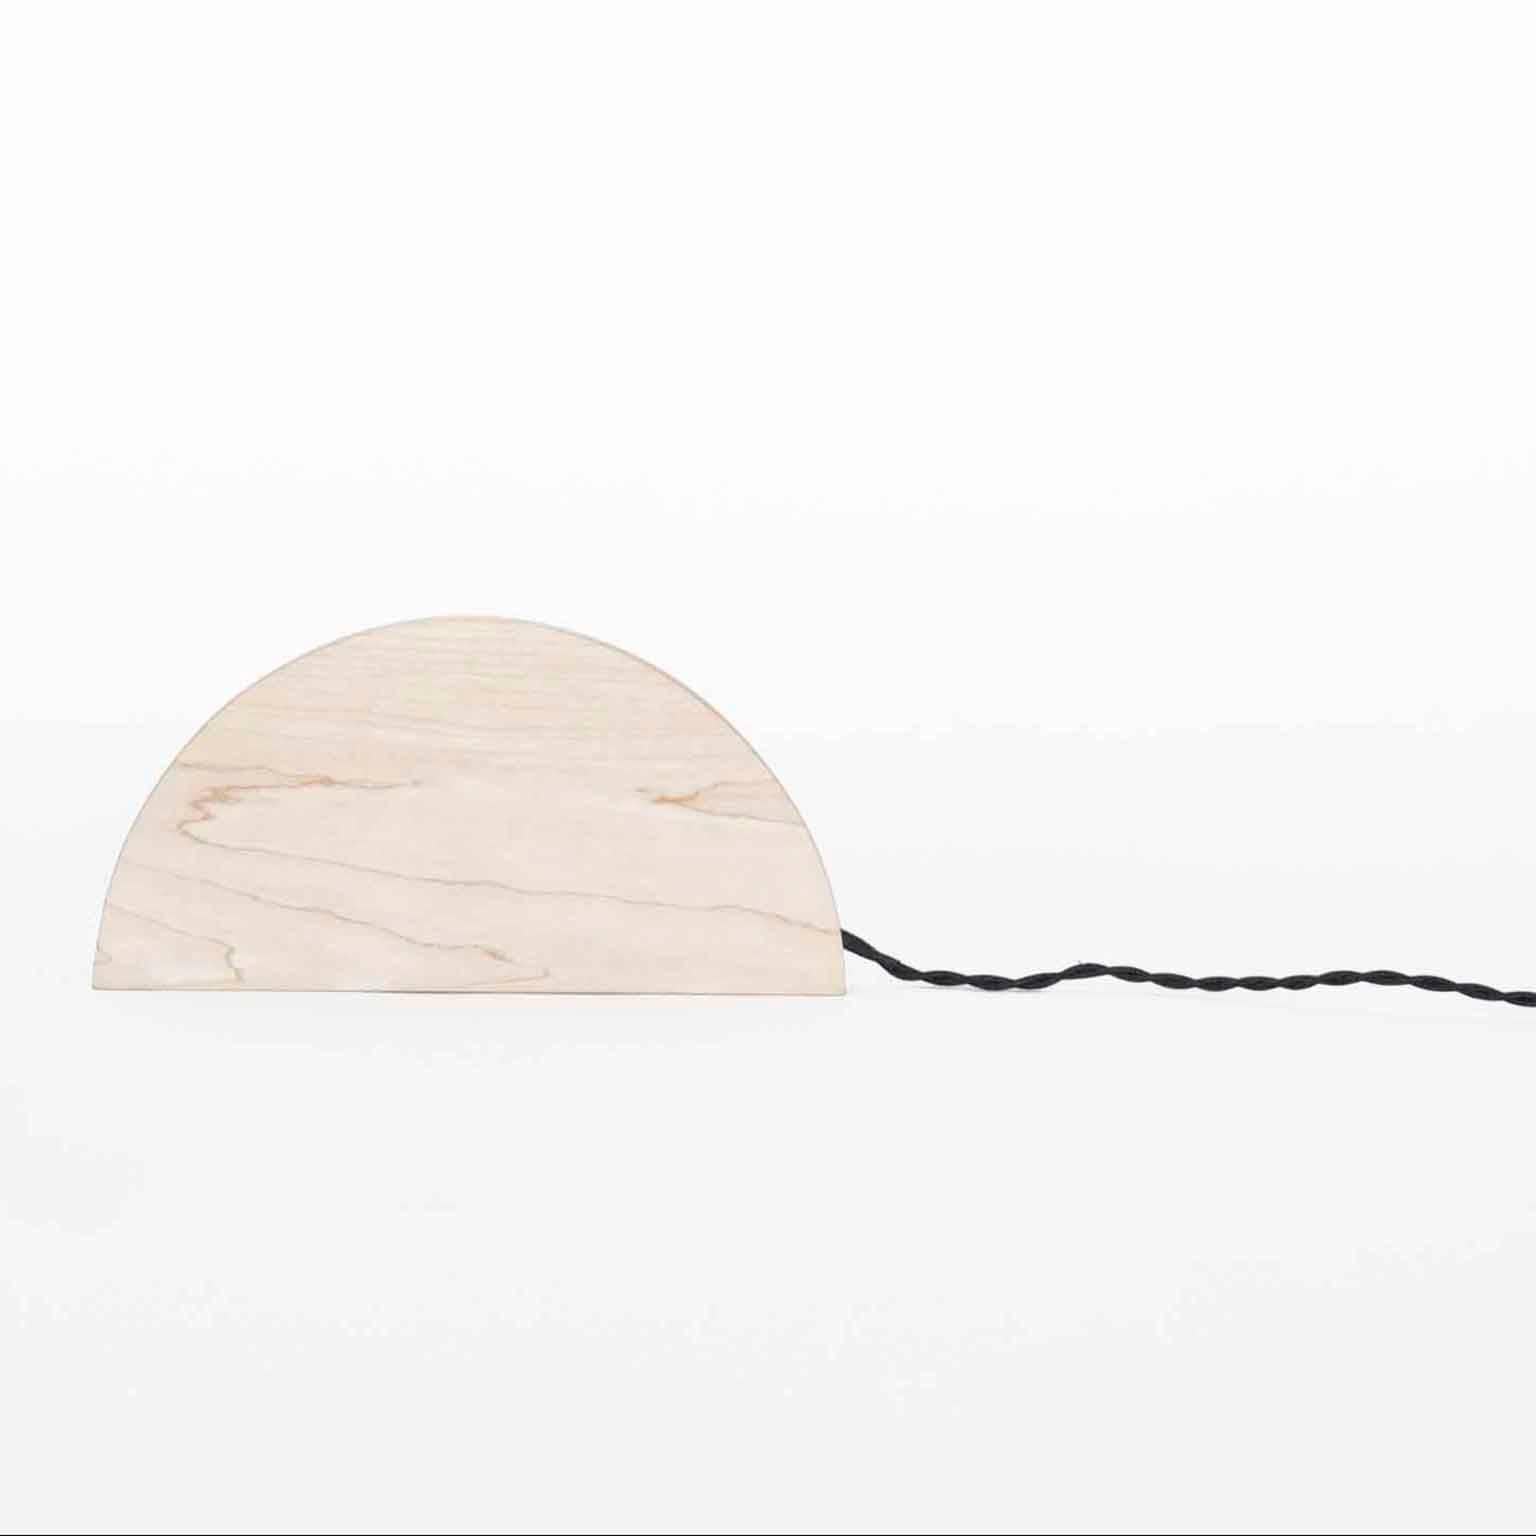 Fort Makers' Small Half Moon Maple Line Light is made in Brooklyn by Noah Spencer. This sculptural LED light juxtaposes hard lines with soft reflected light and emits an ambient aura. The lifespan of an LED strip is approximately 50,000 hours.
12